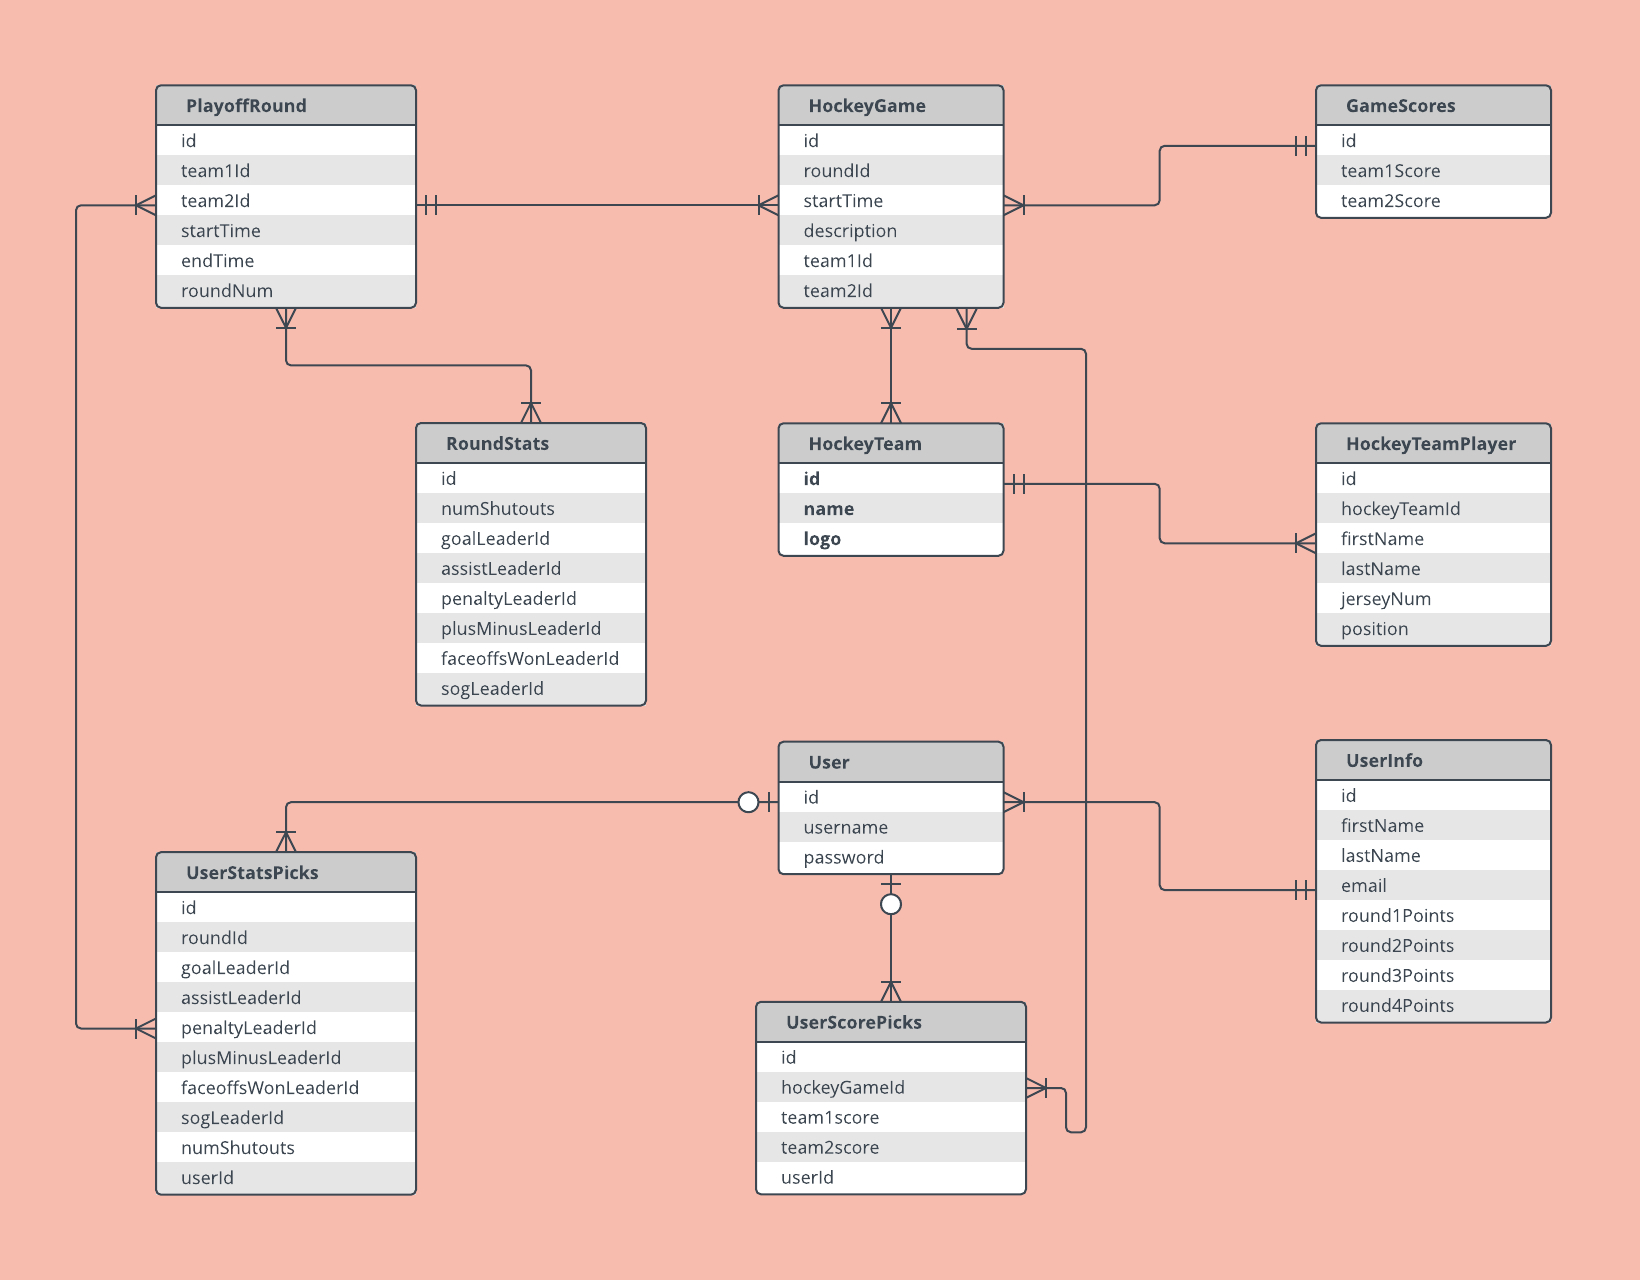 Er Diagram Examples And Templates | Lucidchart intended for Er Diagram Questions